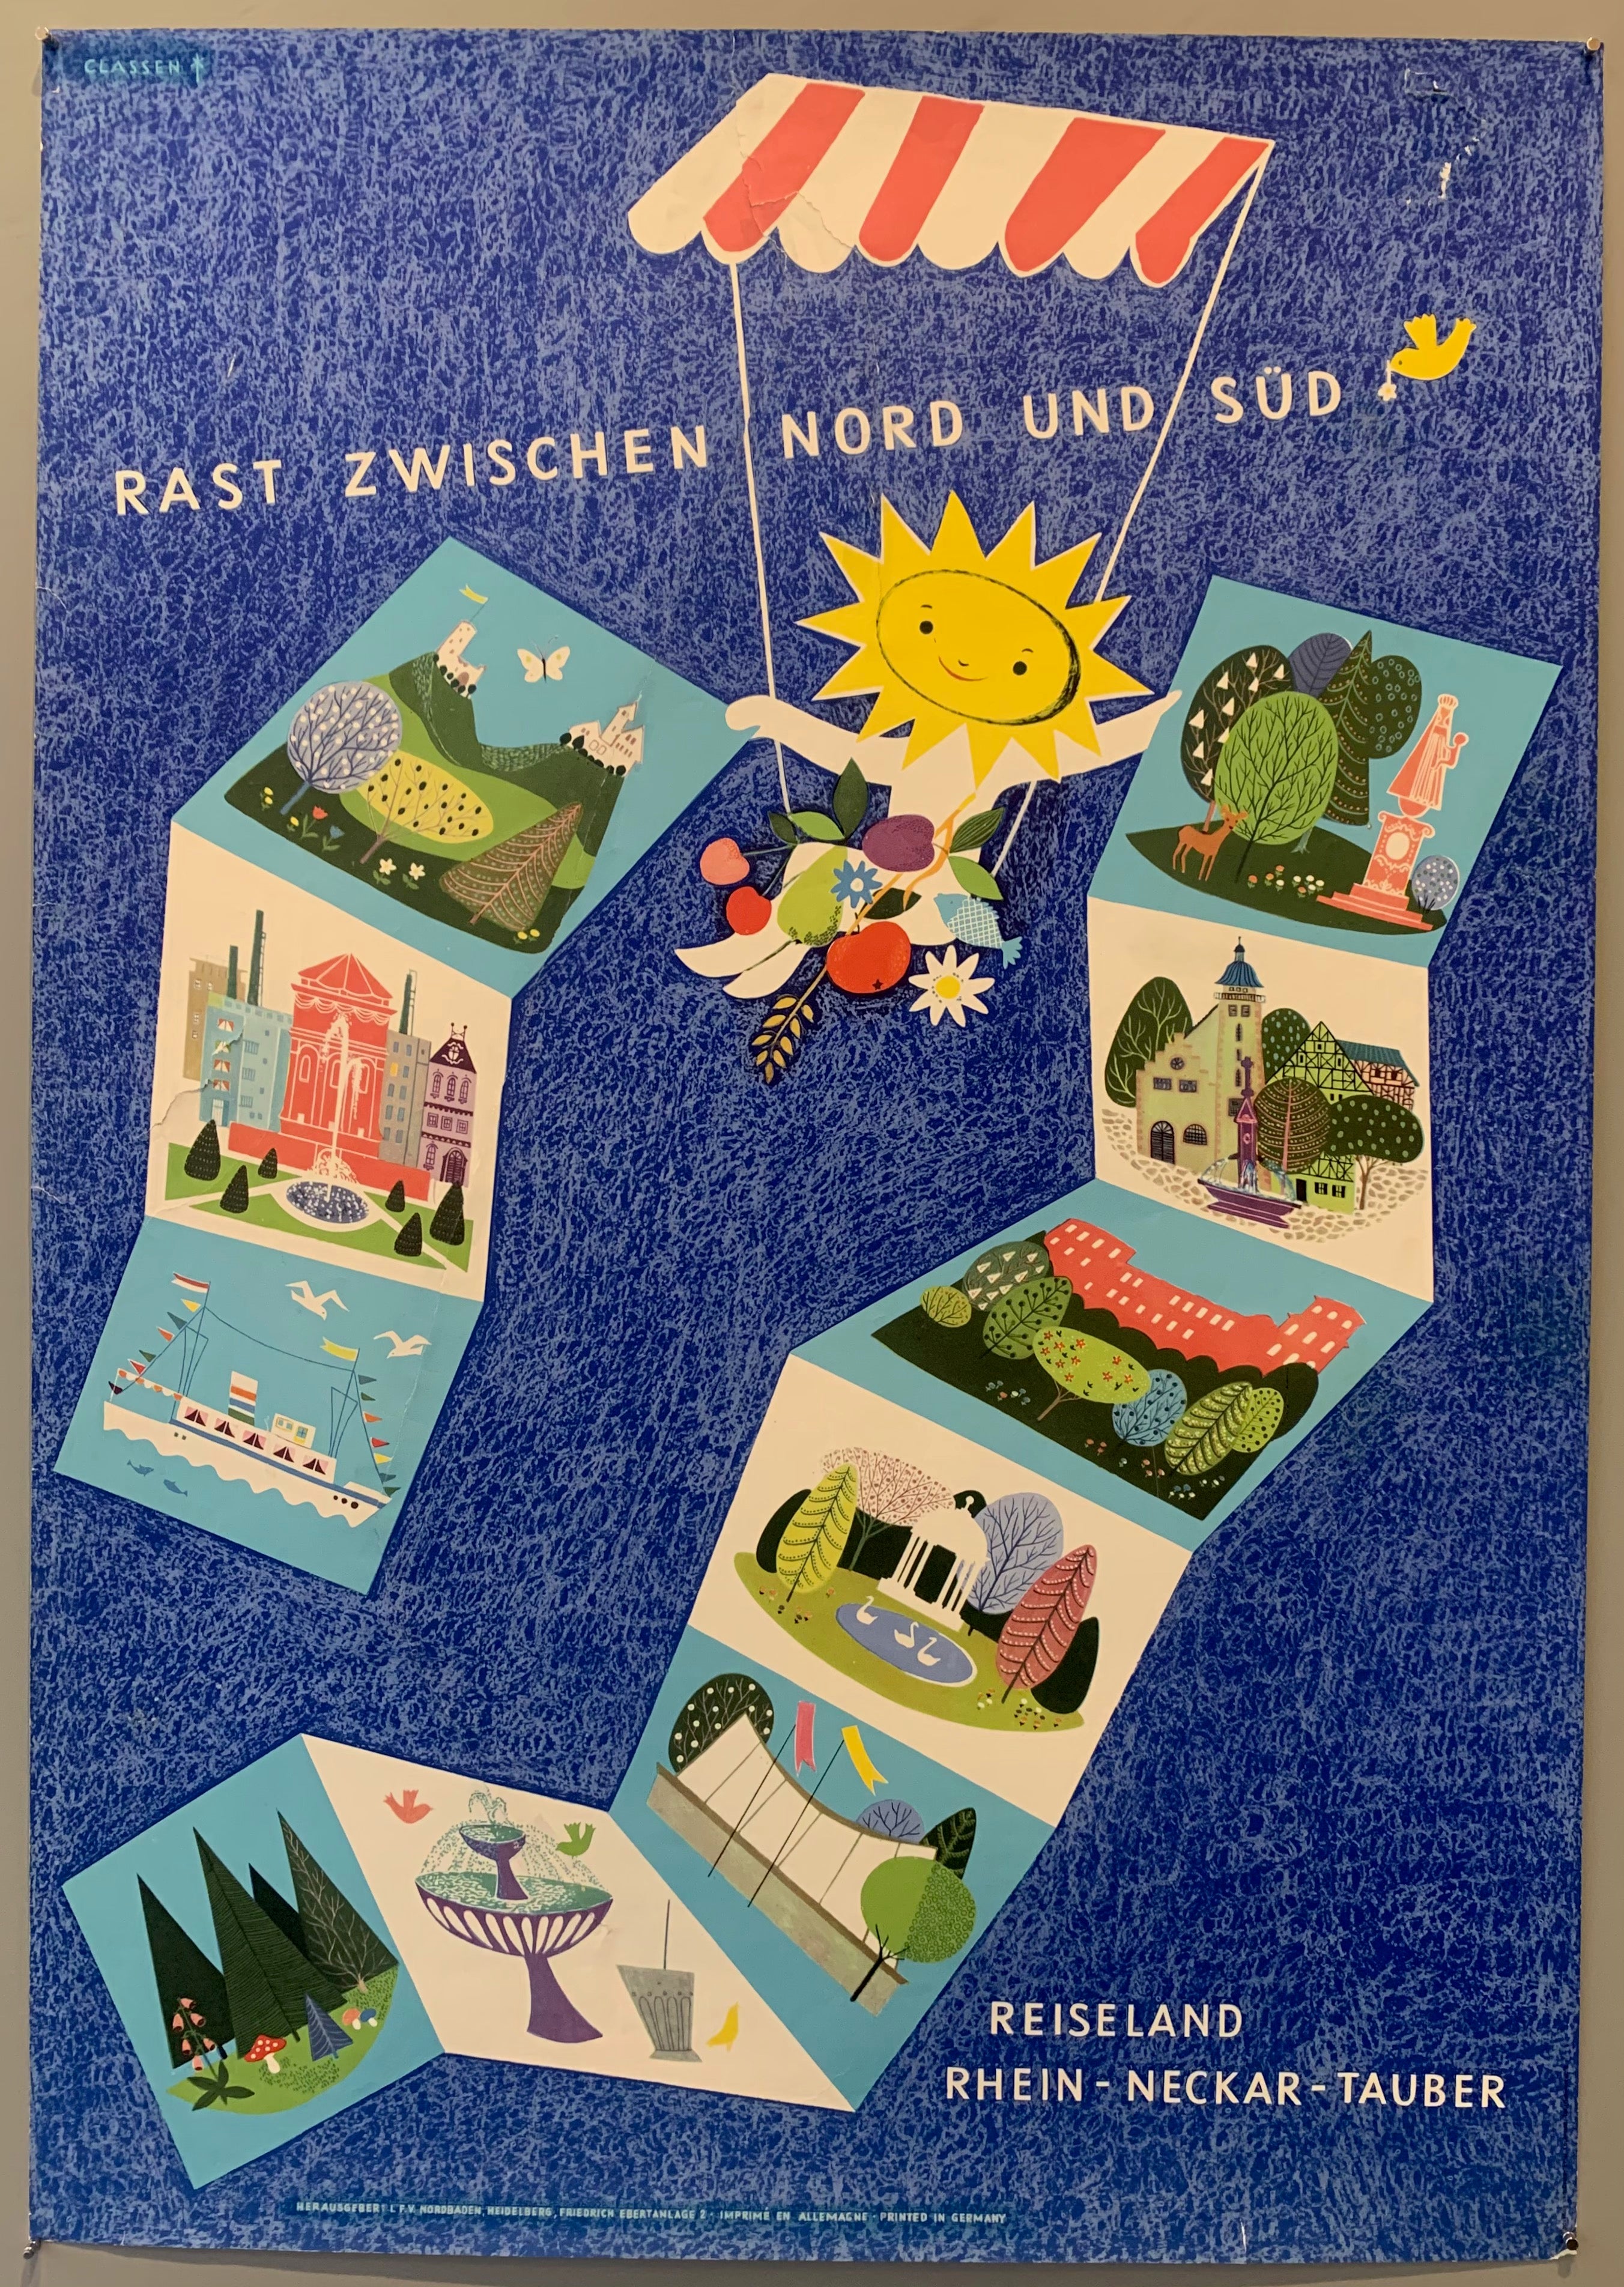 Poster advertising travel destinations Rhine, Neckar, and Tauber, some of Germany's main rivers, implying a place to rest between north and south Germany. There is a sun. creature flying in a seat with fruits and fish in its lap, holding fold out postcards of travel destinations. 